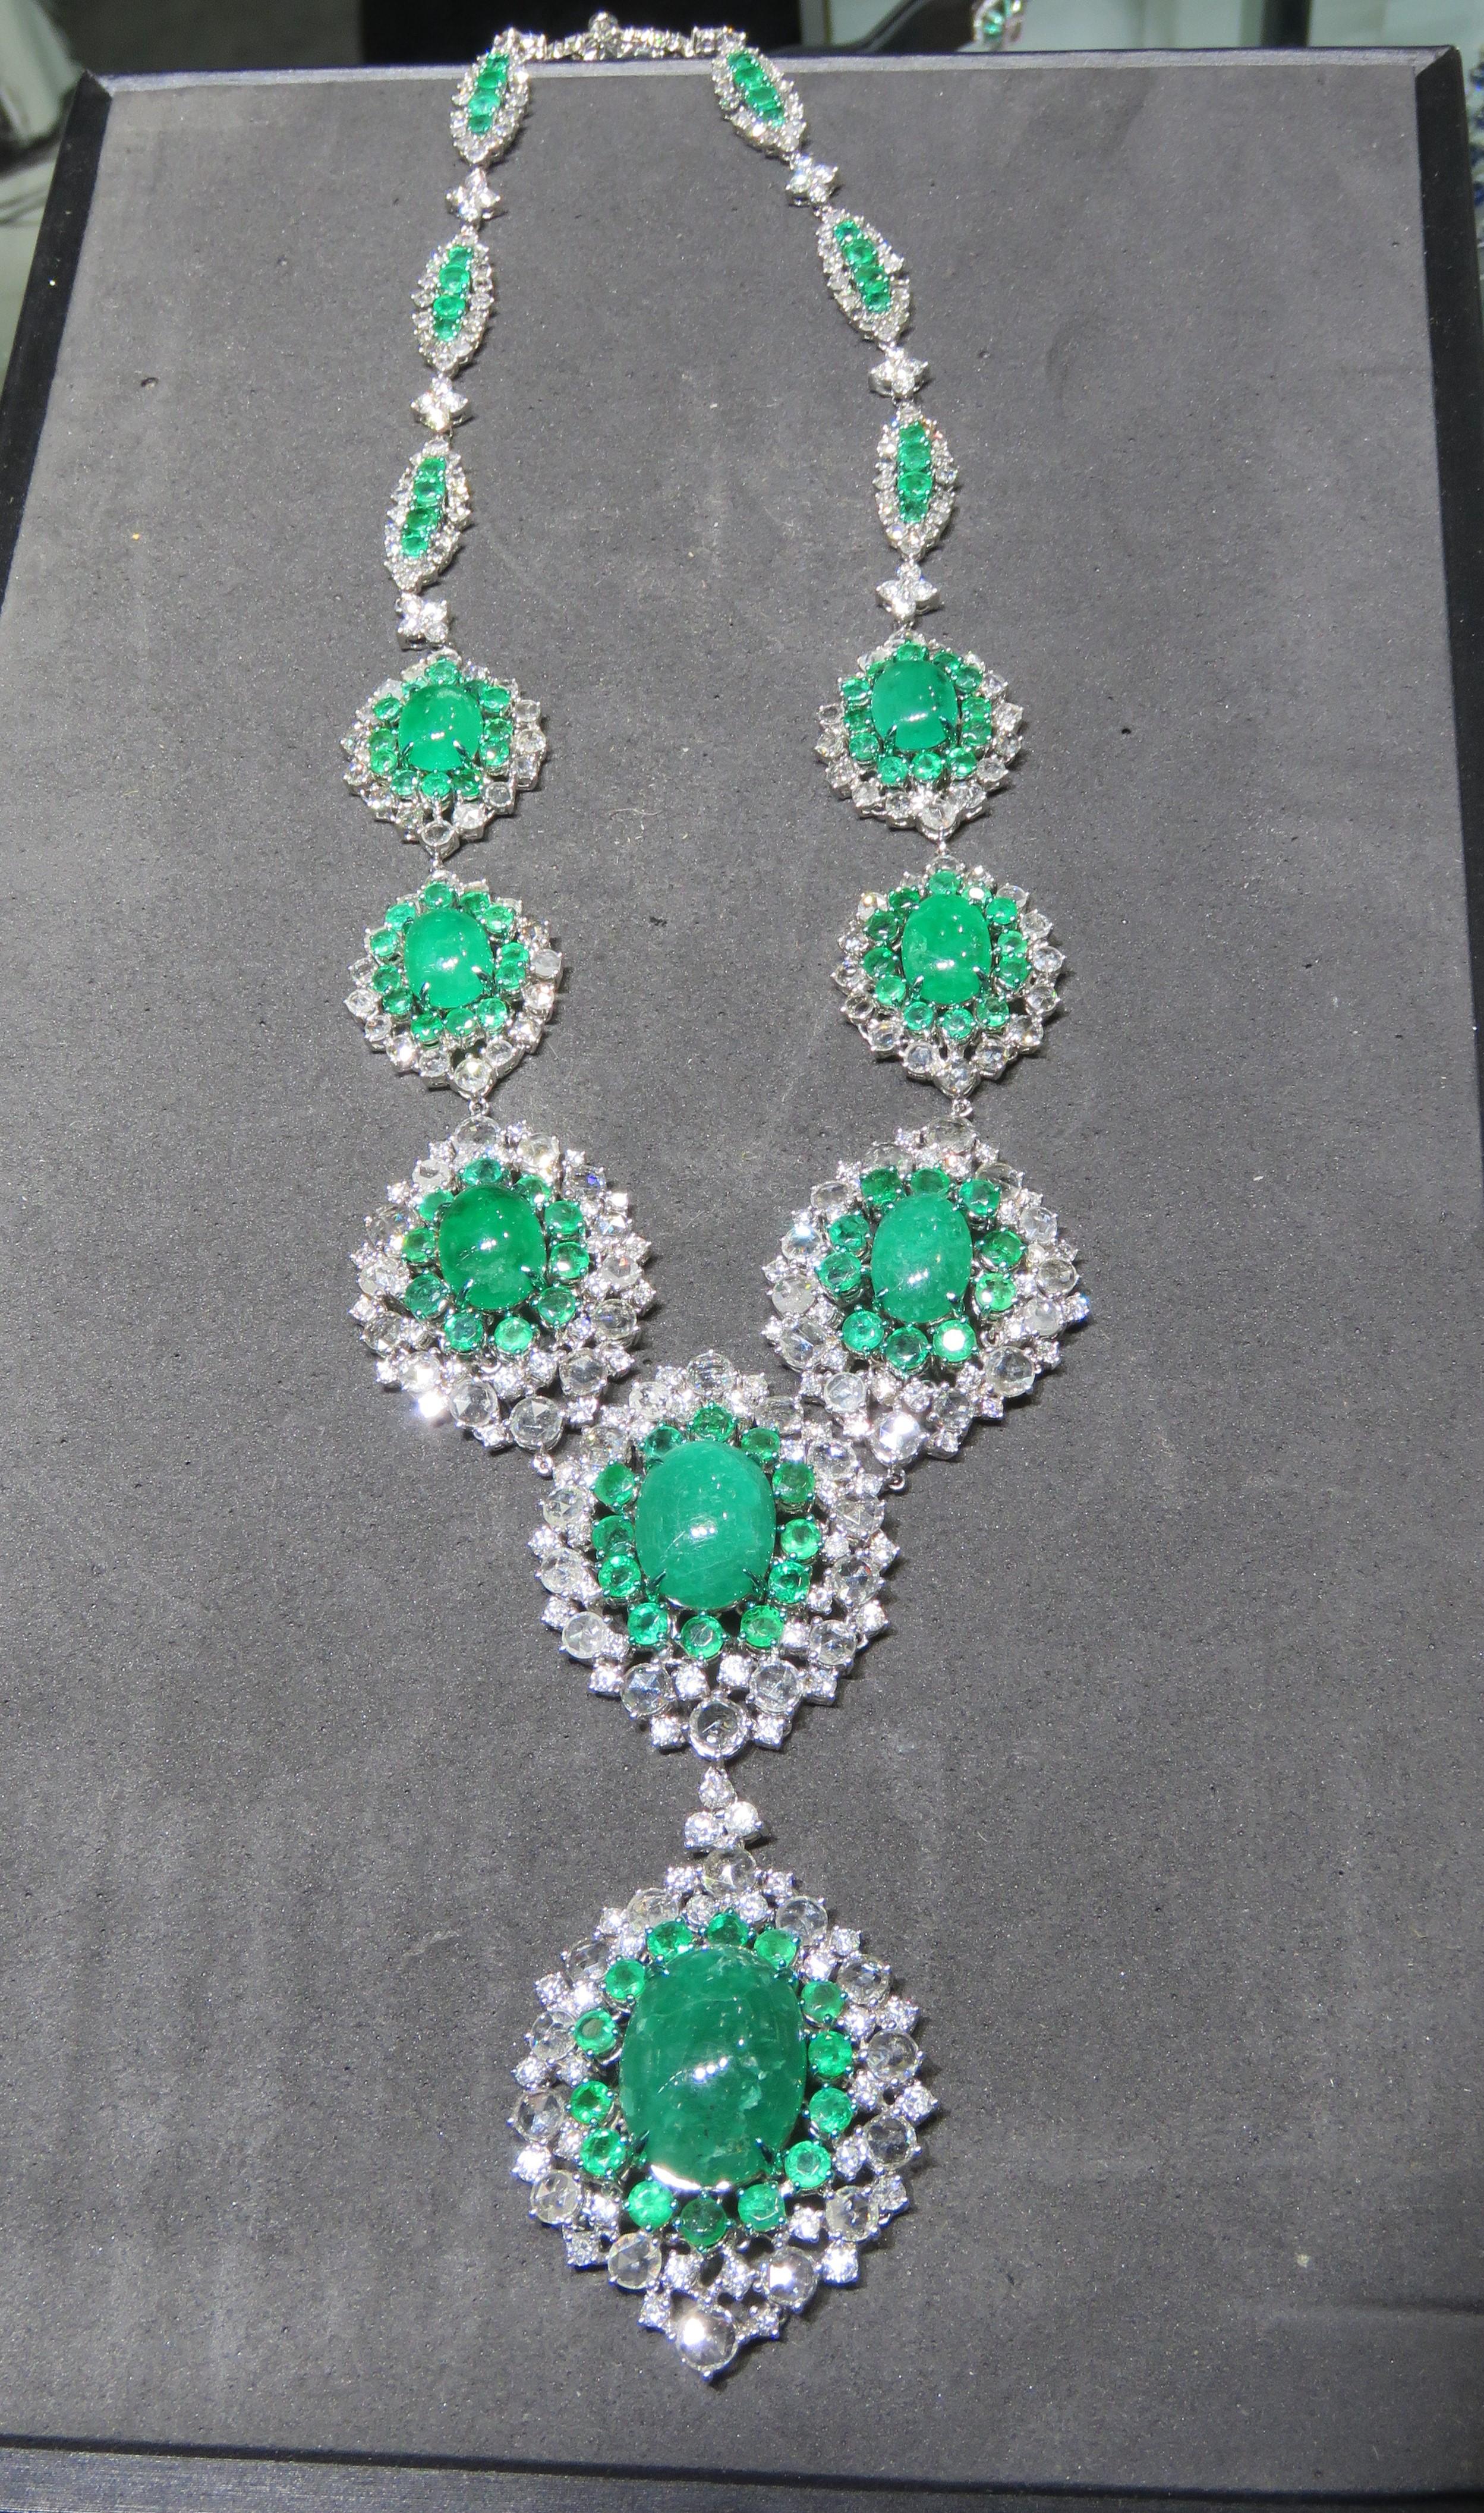 A Rare 18KT White Gold Emerald Diamond Necklace. Necklace is comprised of Finely Set Glittering Gorgeous Cabochon Emerald Necklace adorned with Sparkling Rose Cut and Round Diamonds and Round Emeralds!! T.C.W. approx 70CTS!!! This Gorgeous Necklace